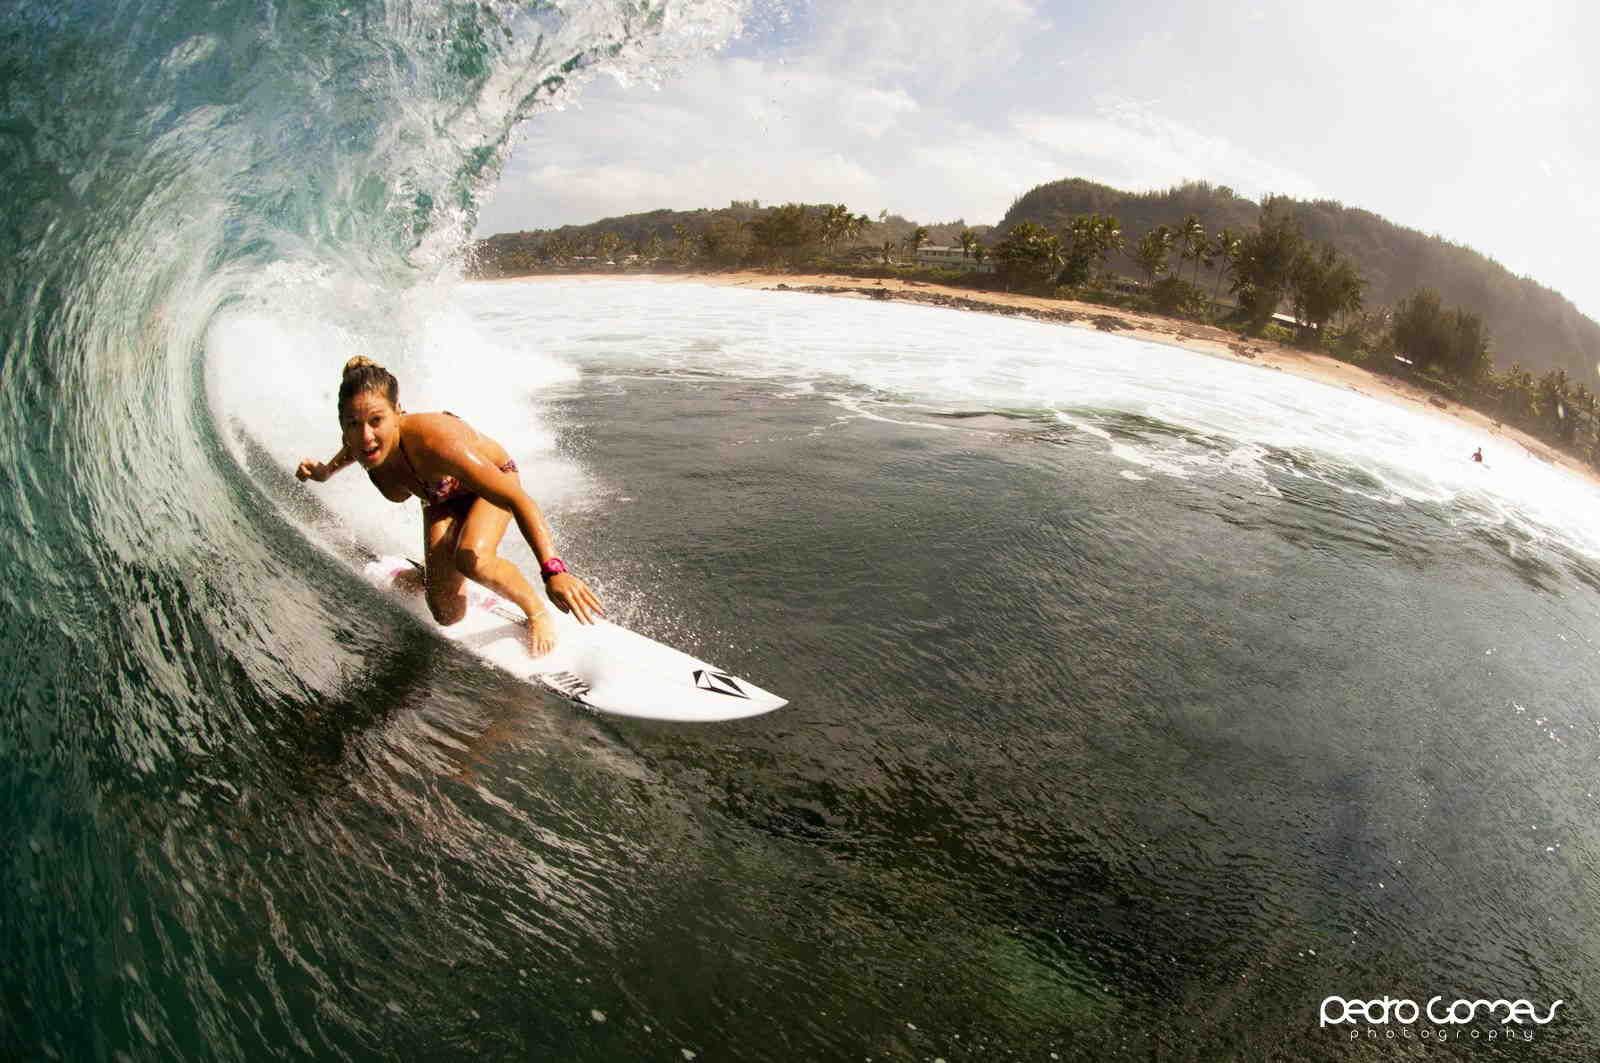 Is learning to surf Easy?